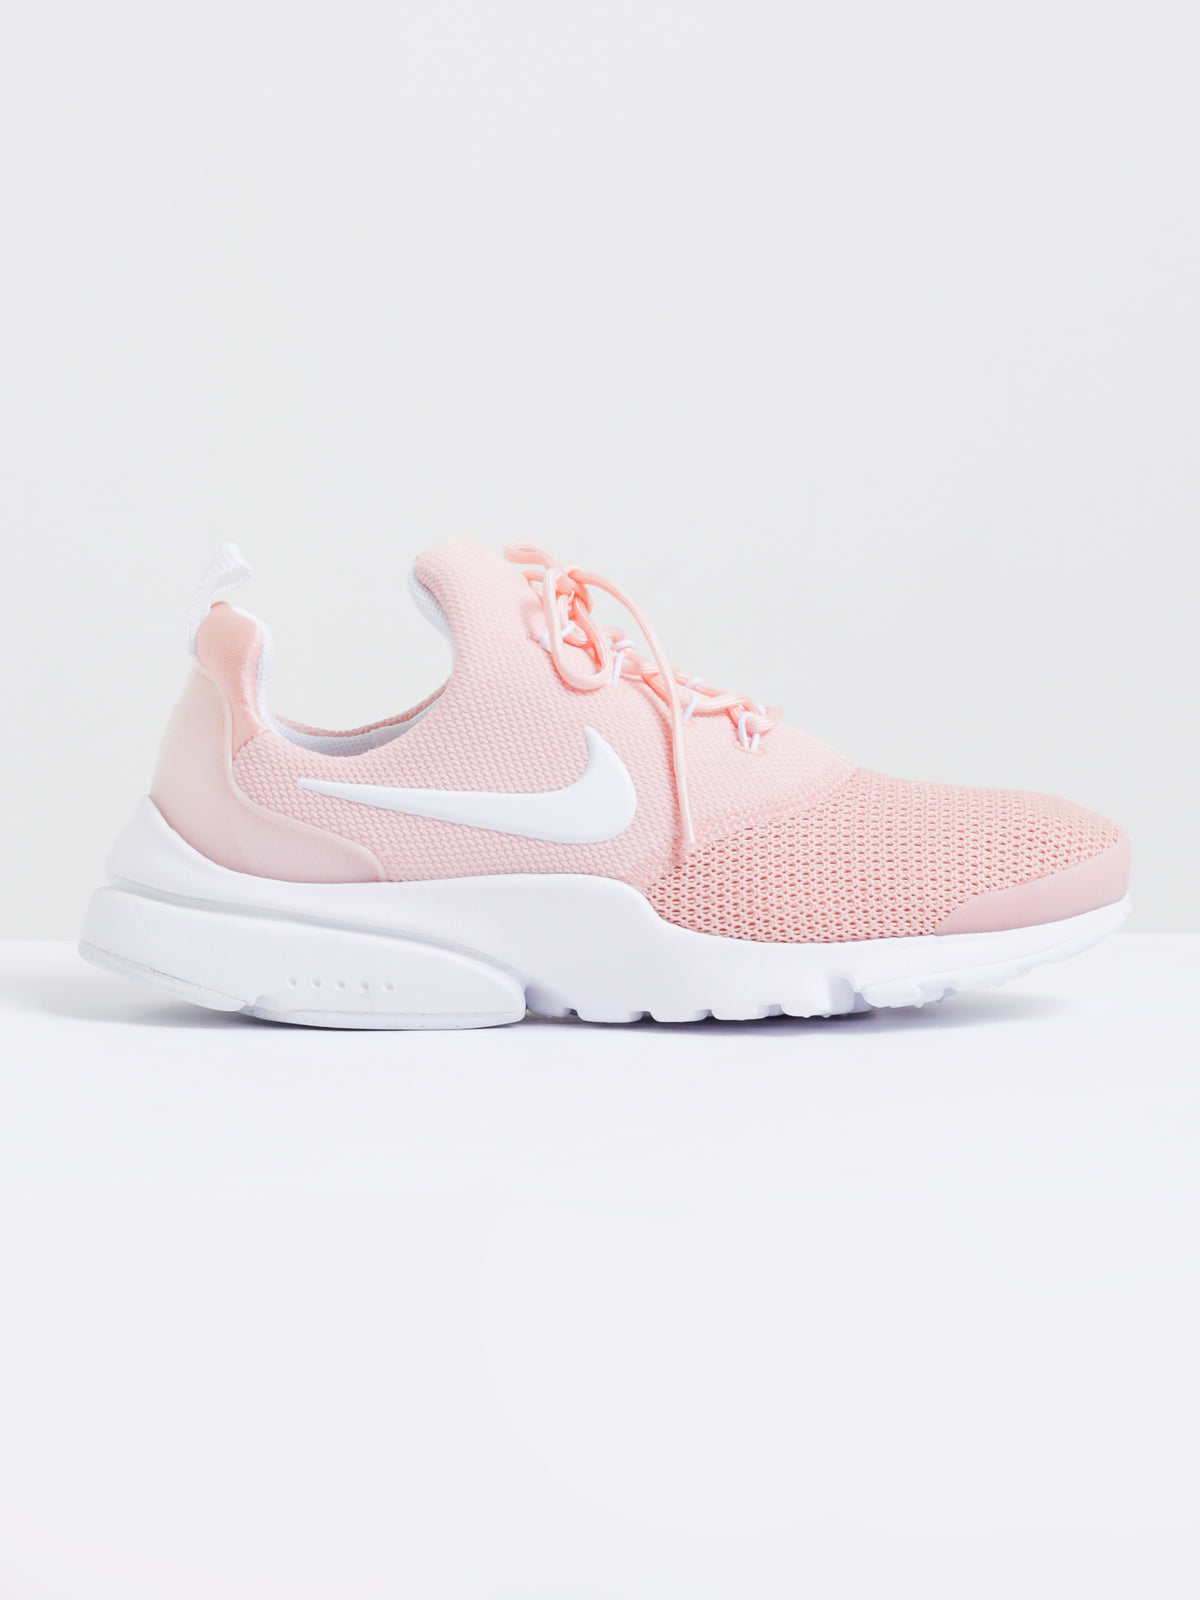 Womens Presto Fly Sneakers in Coral